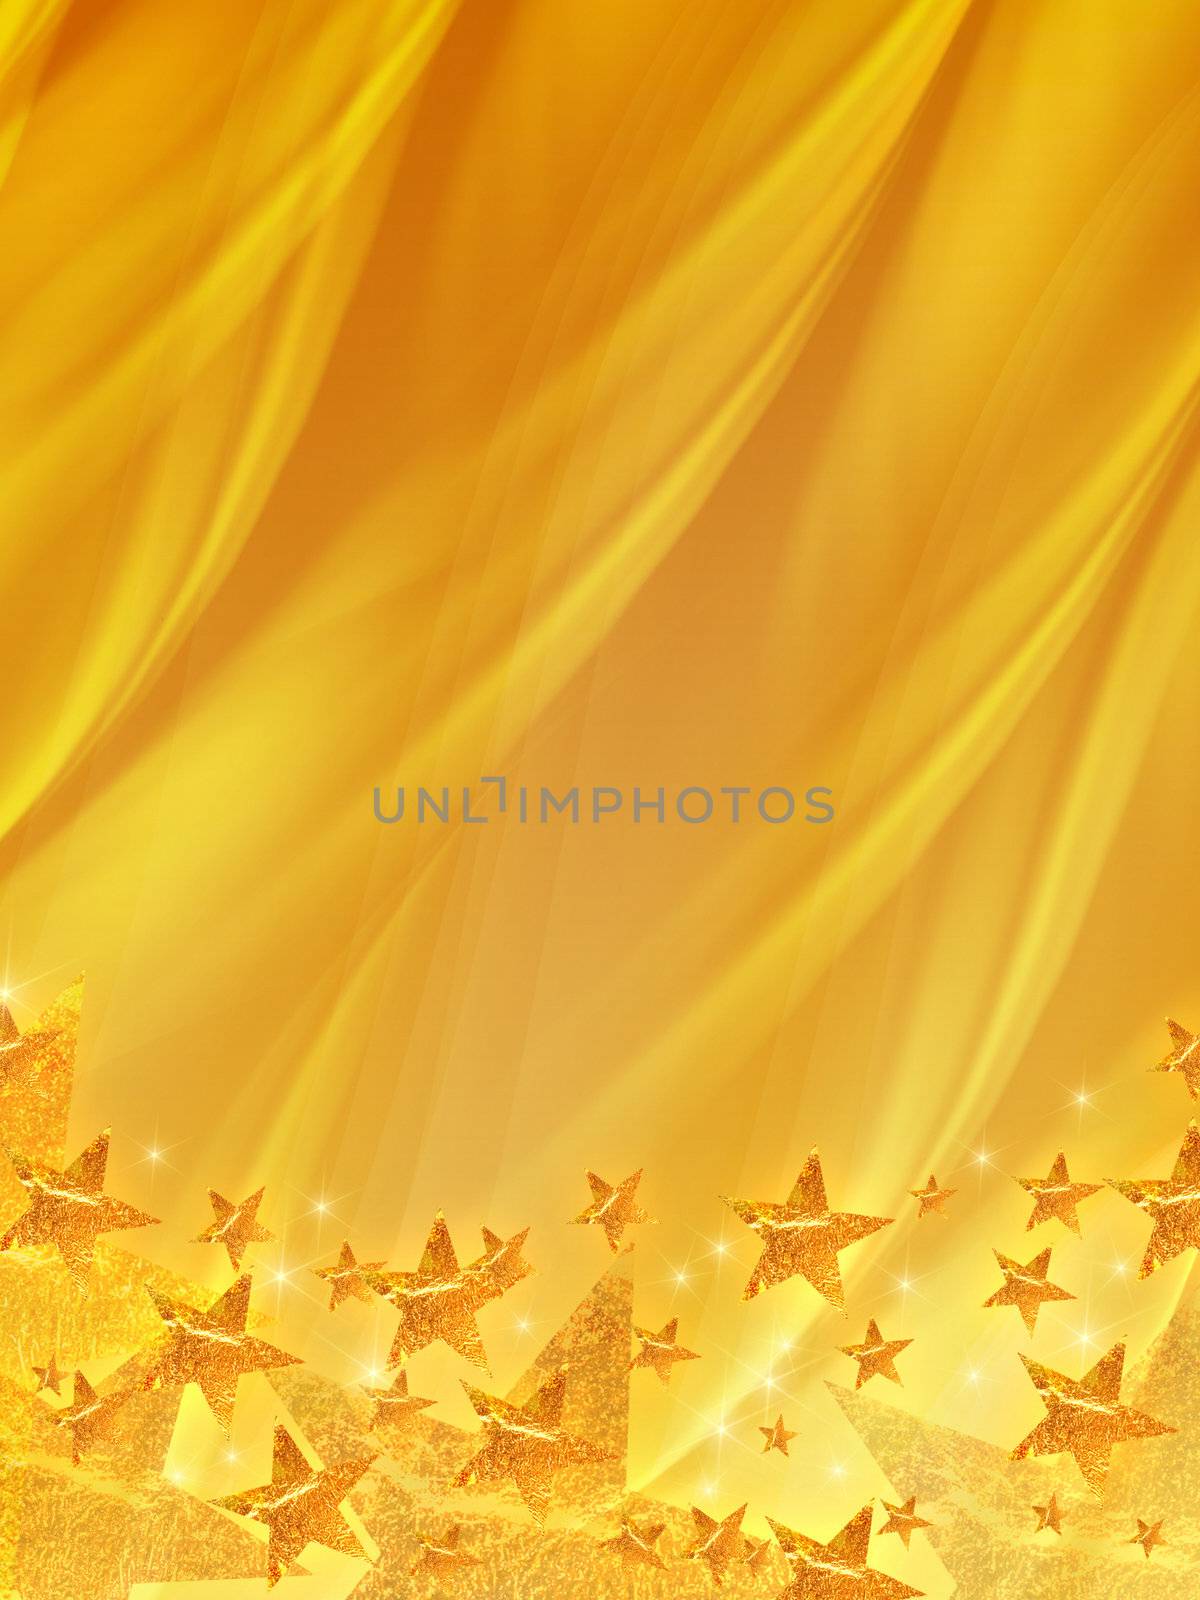 shining golden stars over yellow background, abstract christmas card